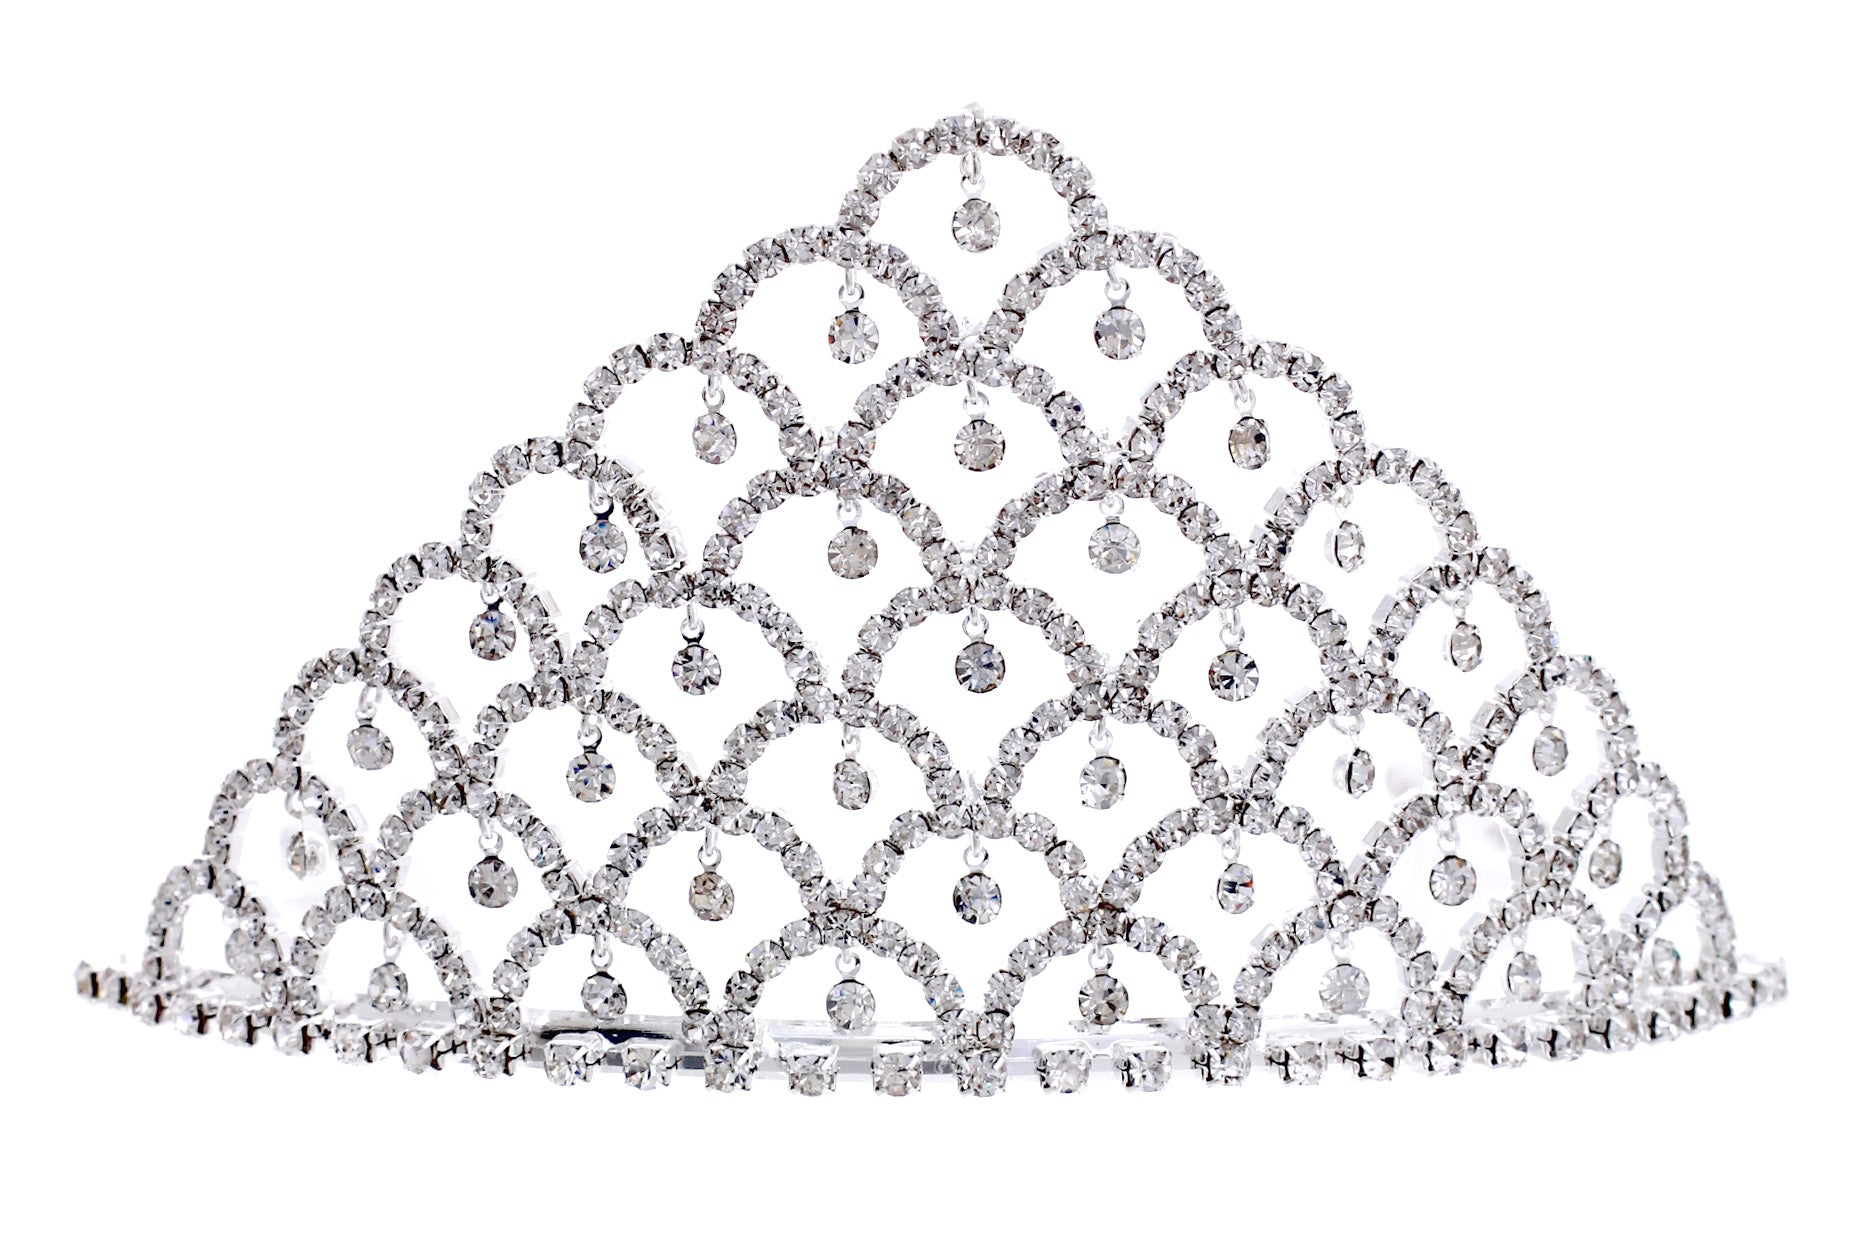 Extravagant crown with dangle charms - Monique Fashion Accessories